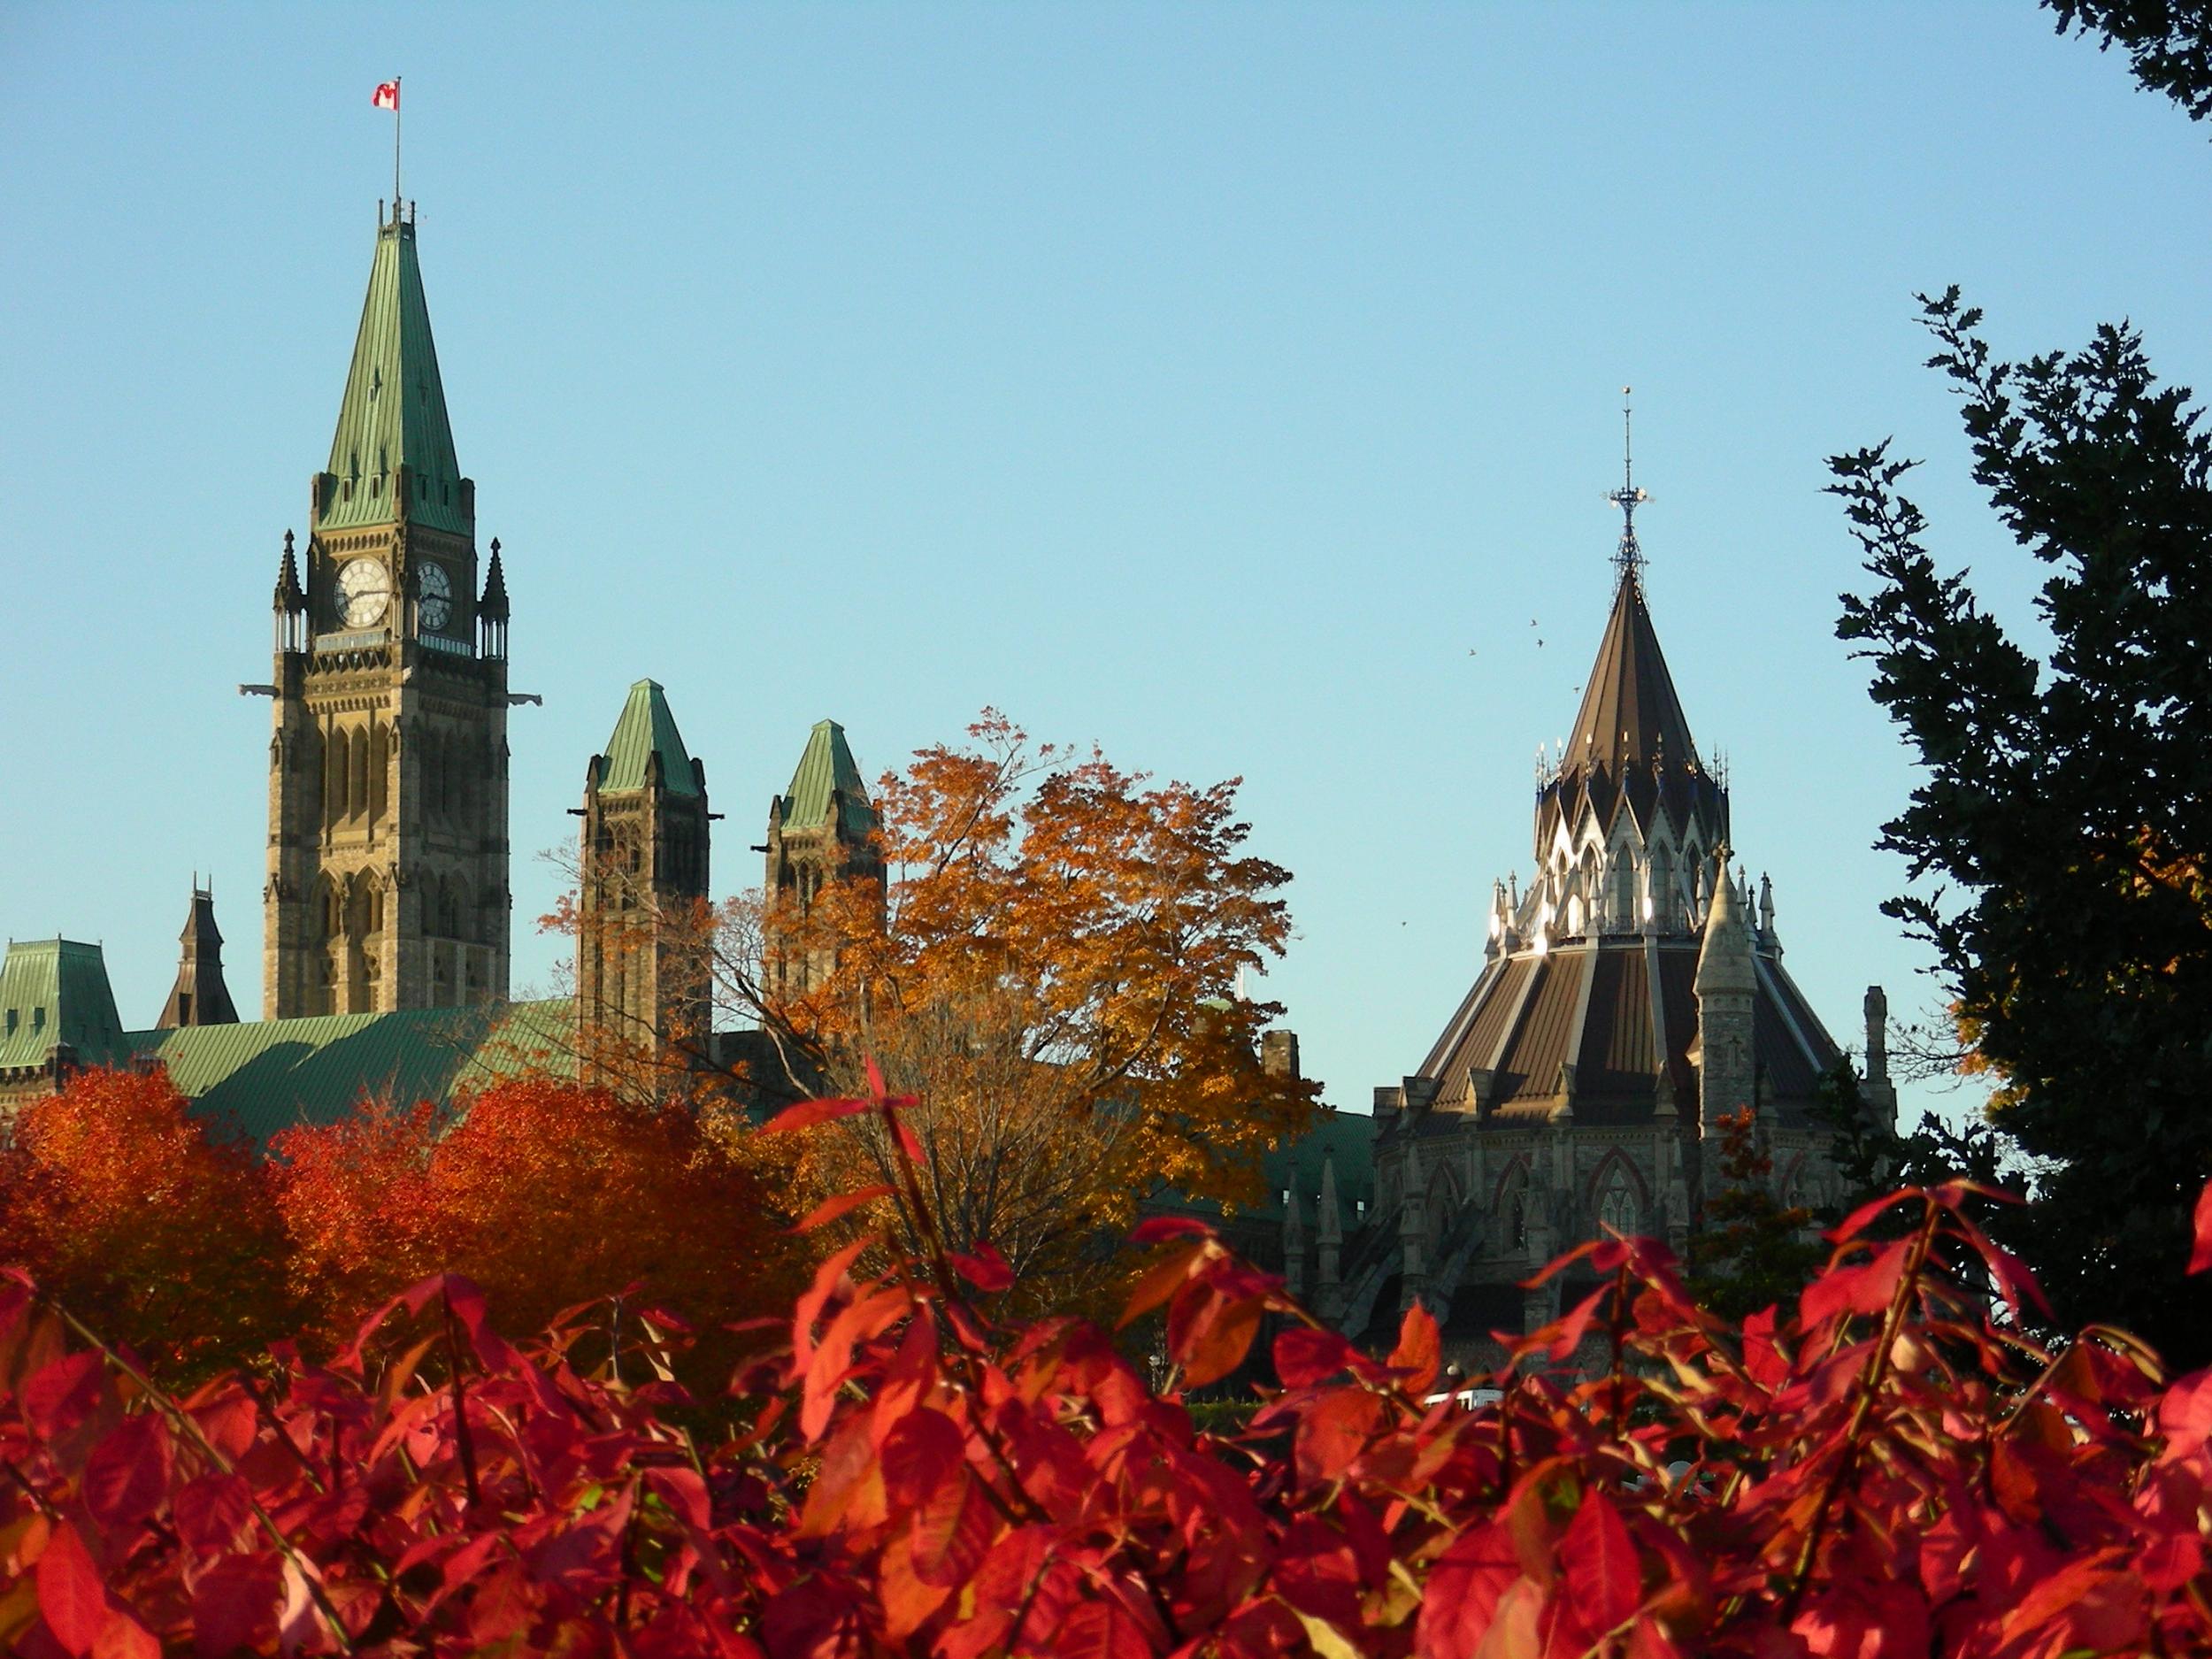 Check our Ottawa’s parliament buildings